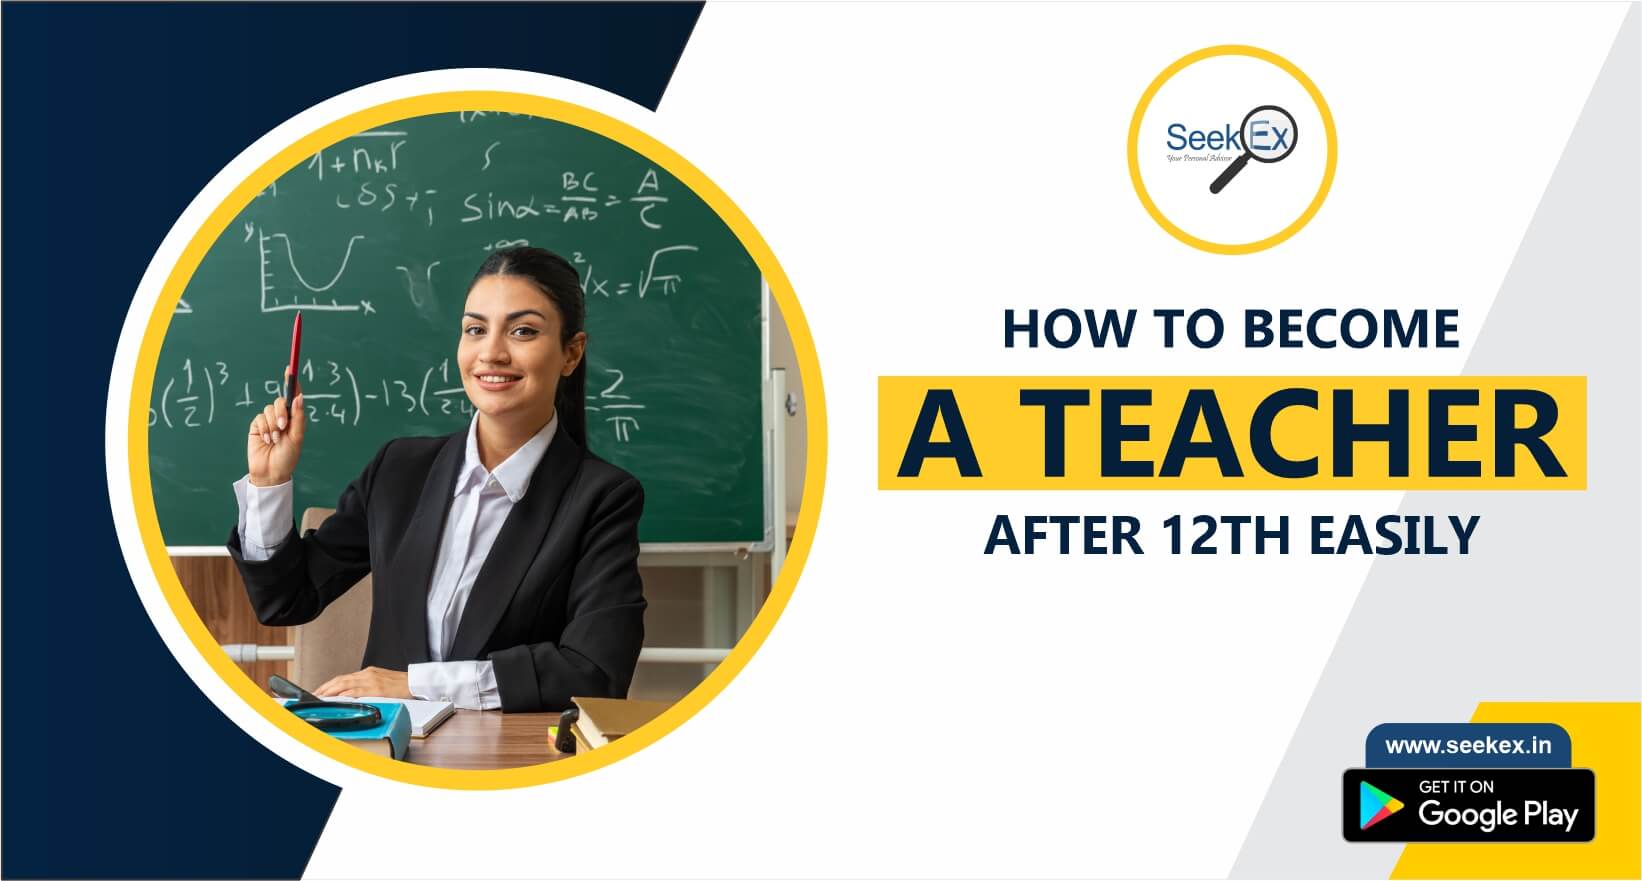 How to become a teacher after 12th Easily